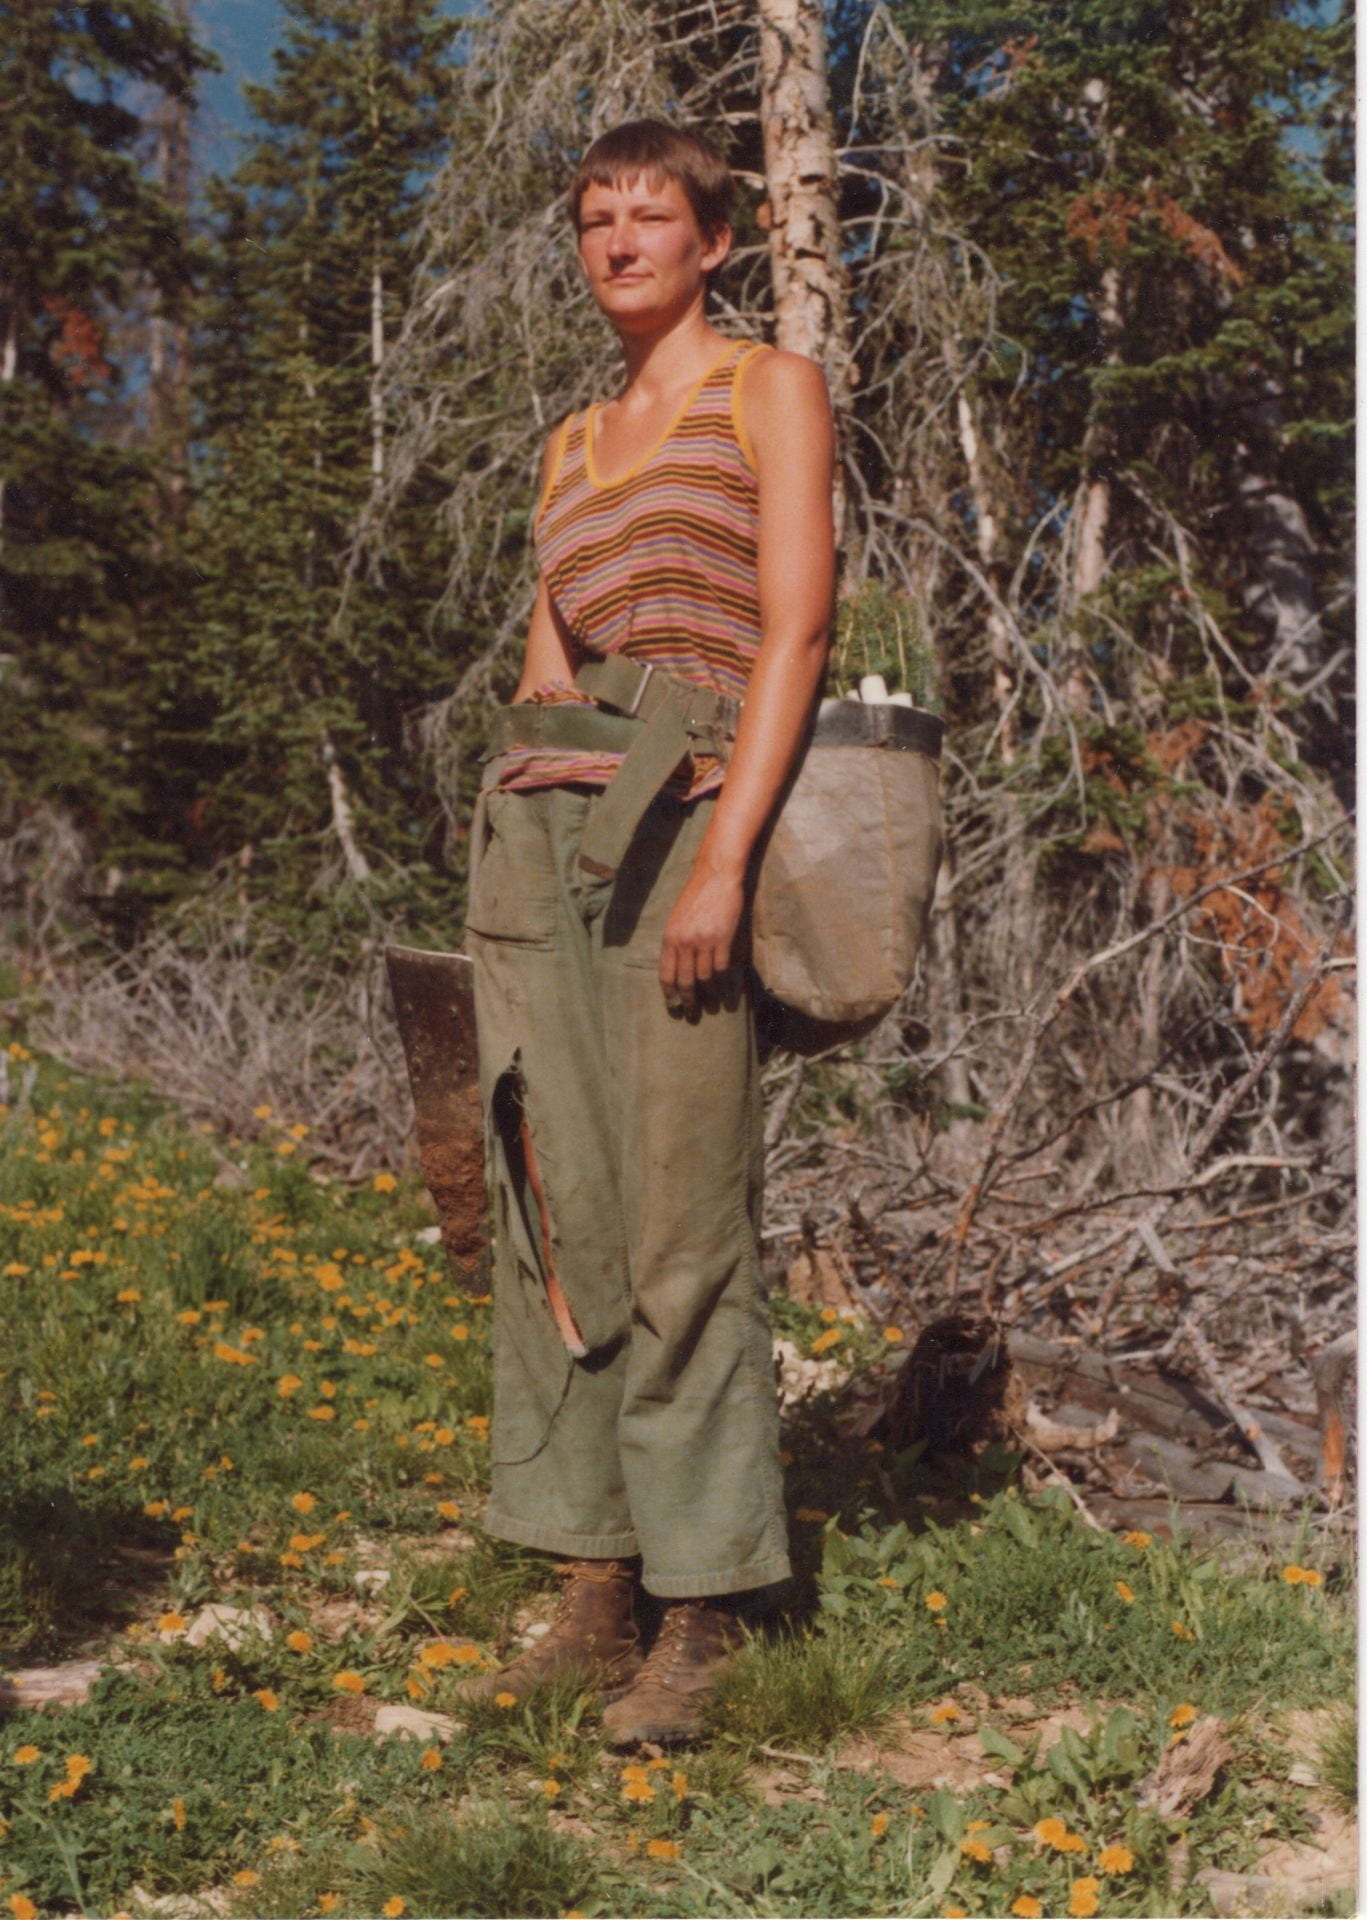 Tree planter Jane Feetch poses with pickaxe and bag of saplings against a forest backdrop.